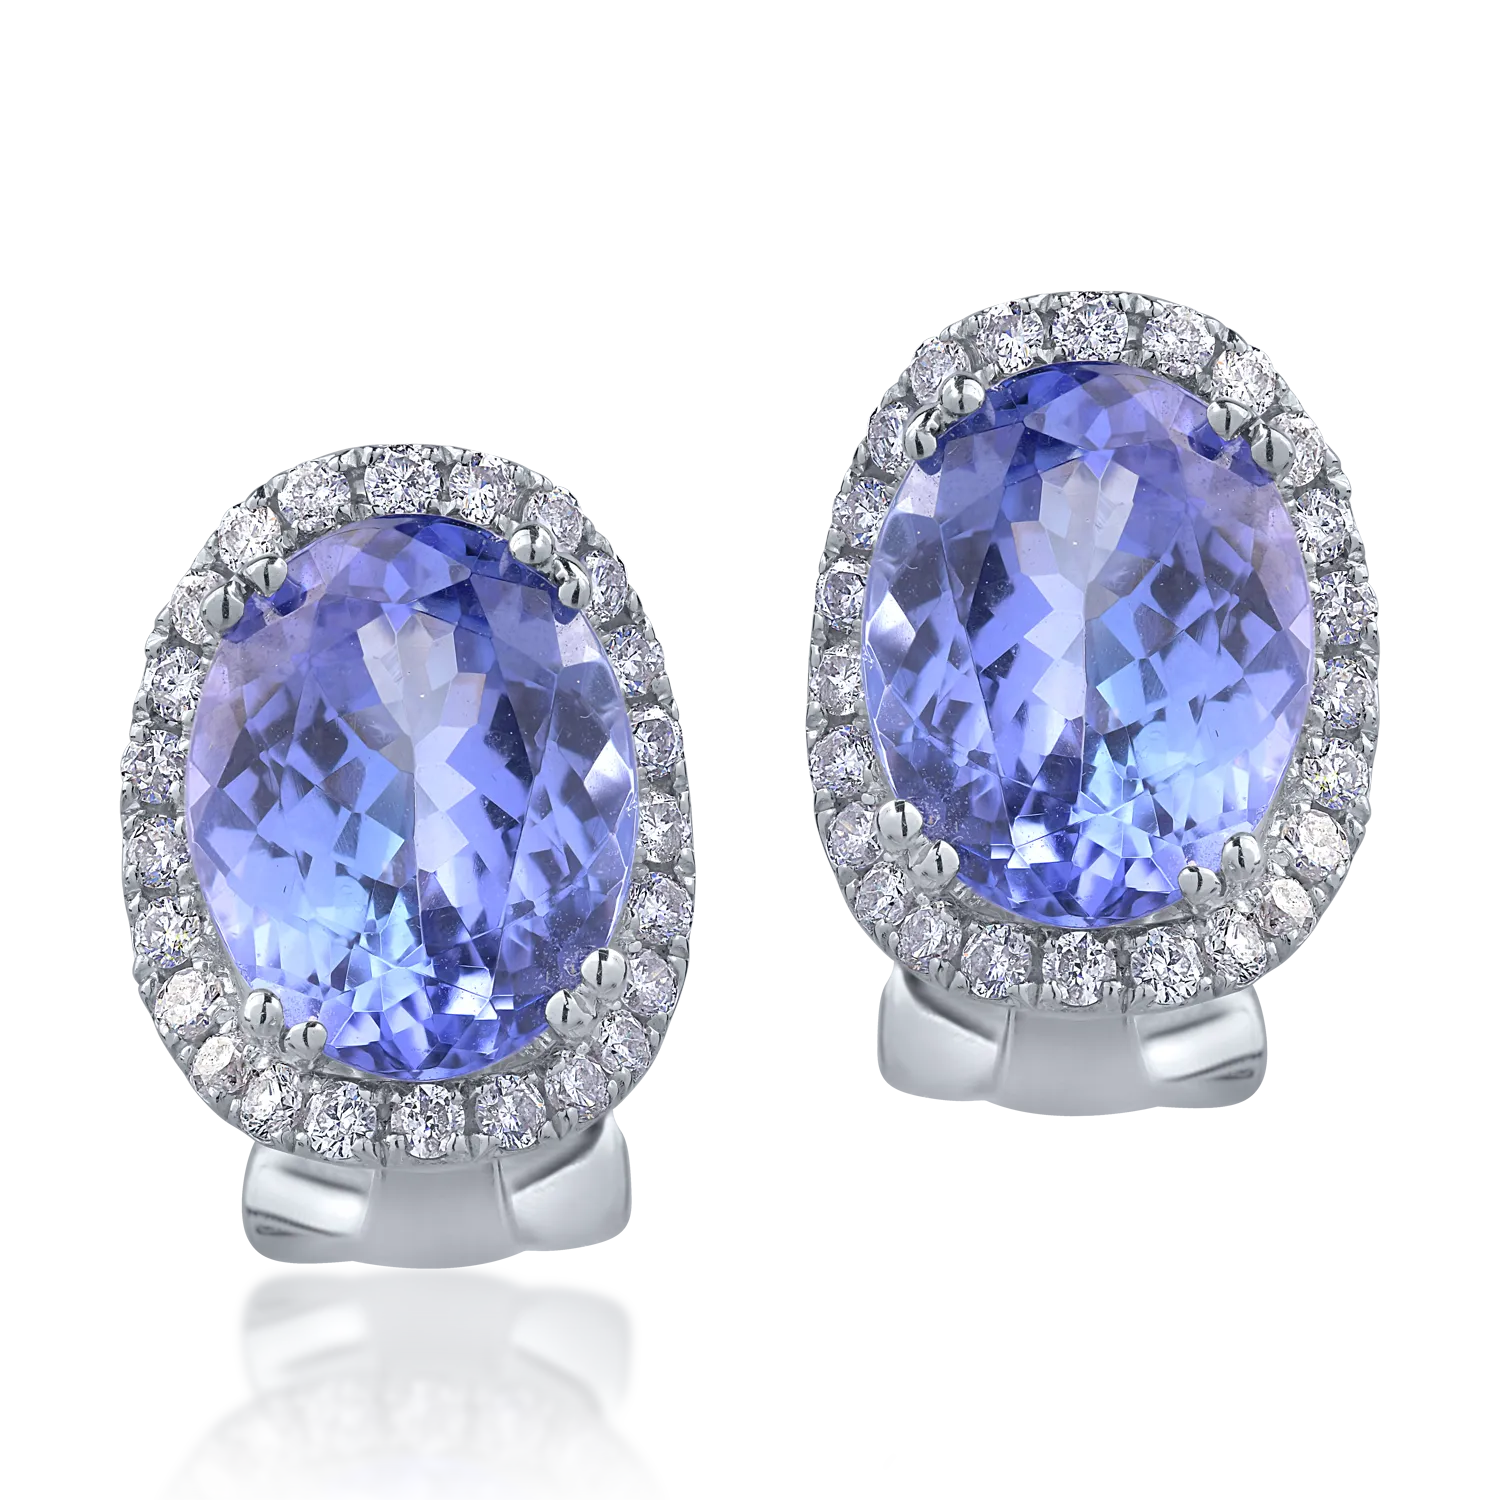 14K white gold earrings with 4.74ct tanzanites and 0.38ct diamonds